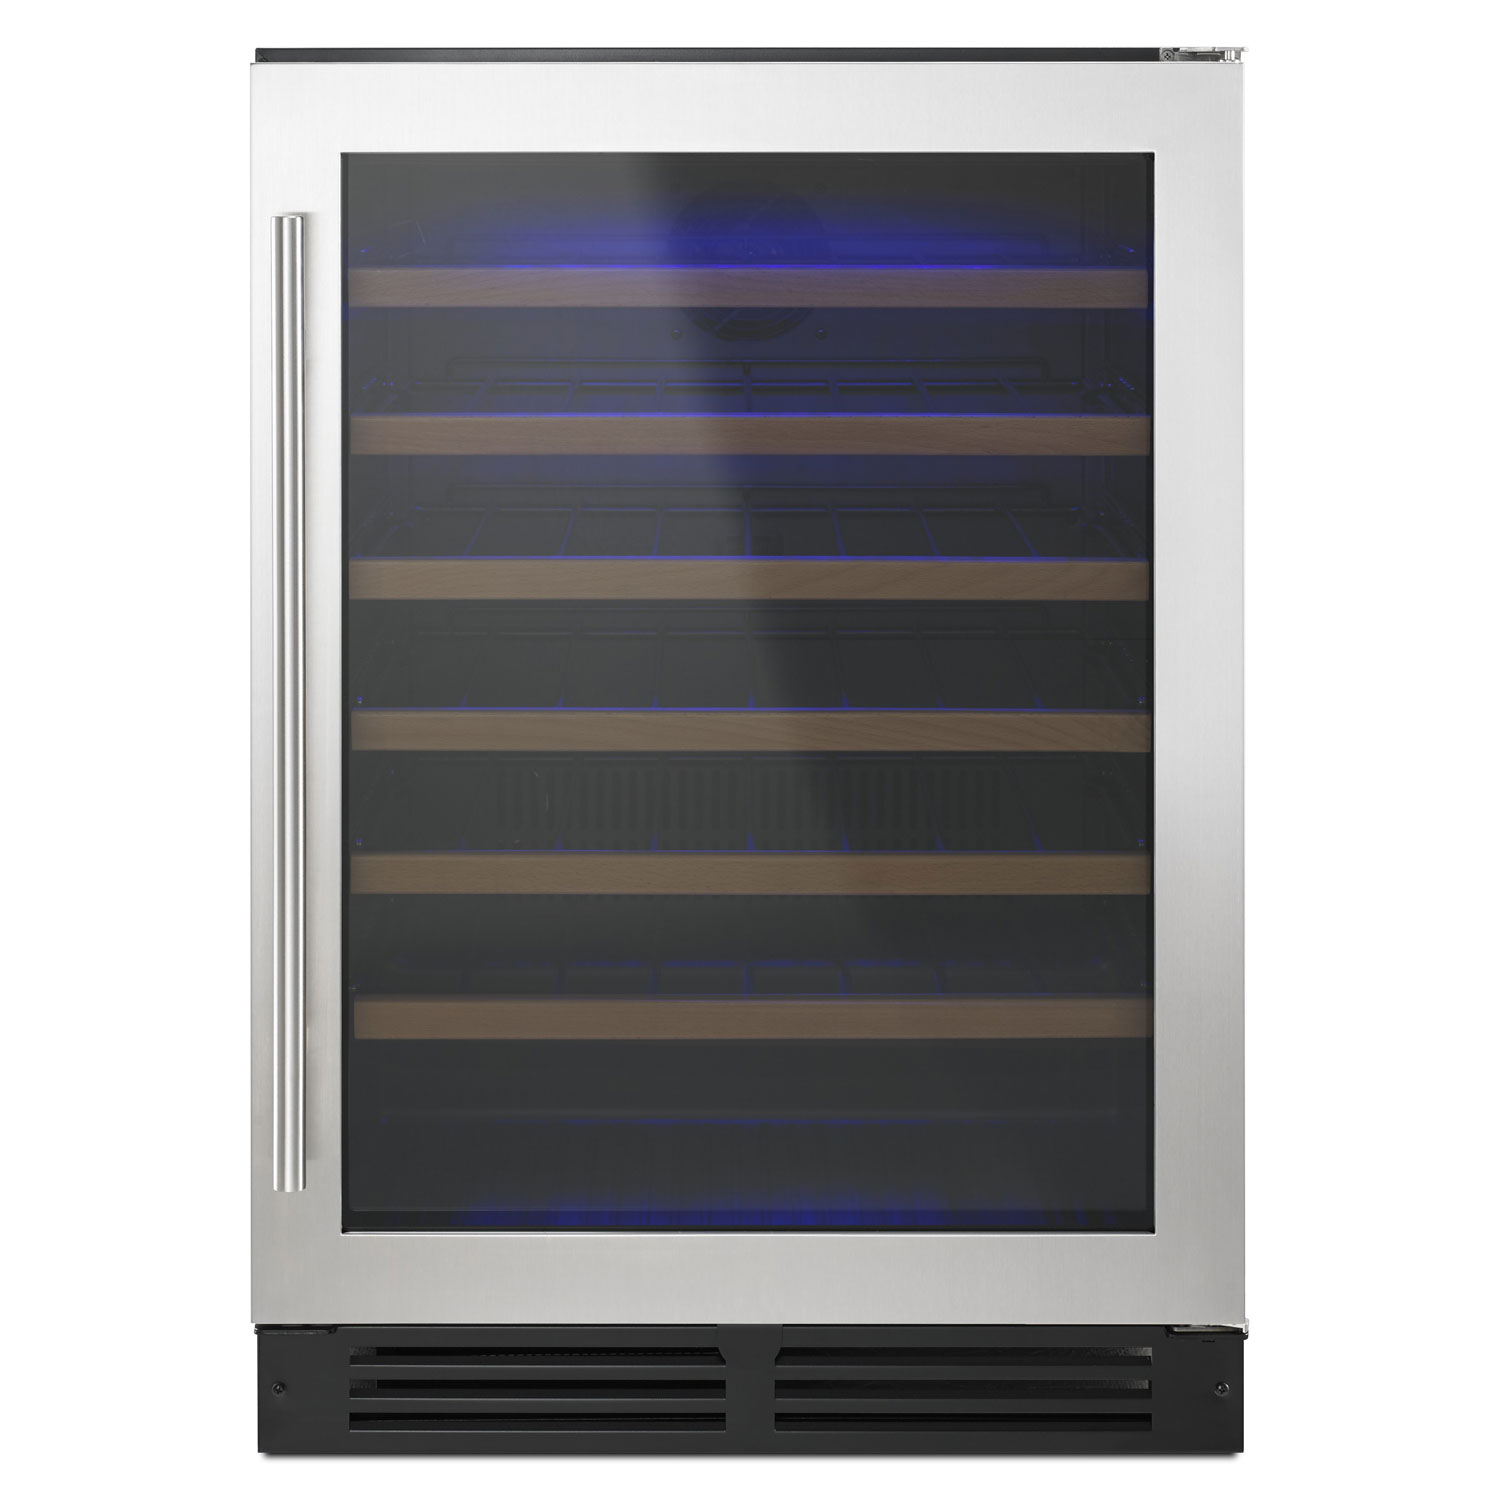 Whirlpool 51-Bottle Wine Cooler (WUW35X24DS) - Black-on-Stainless